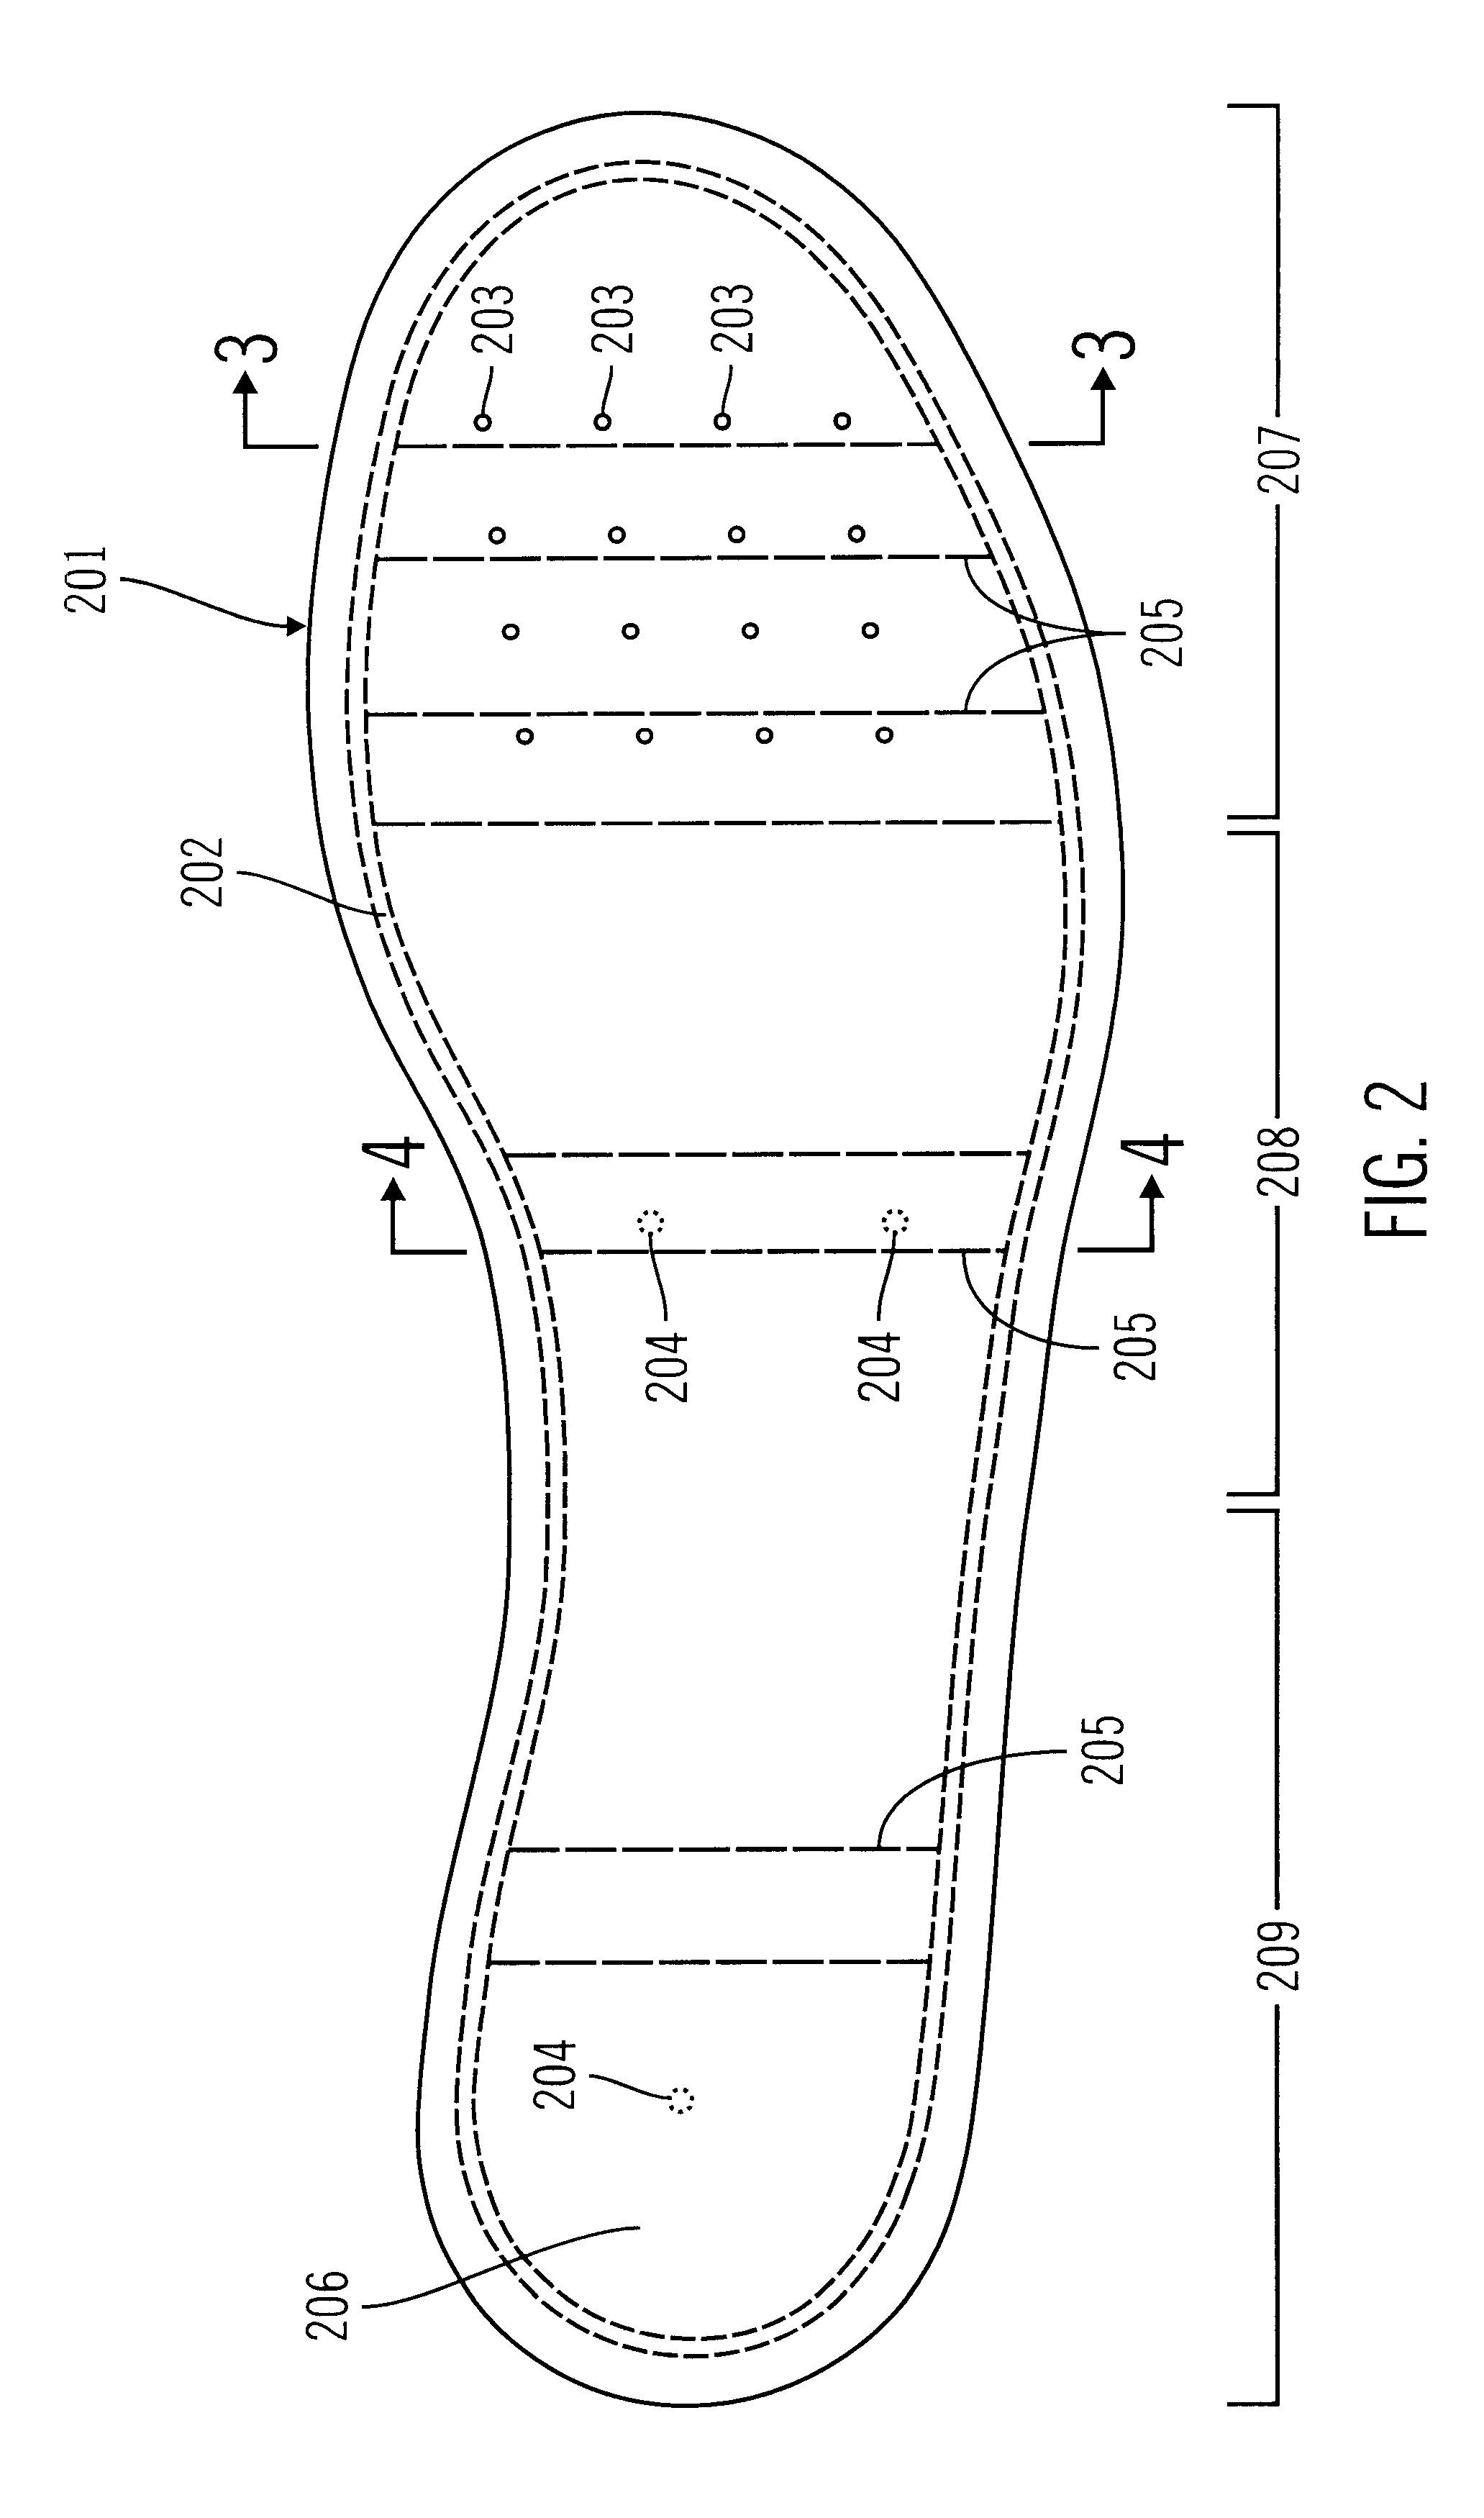 Footwear with fixedly secured insole for structural support